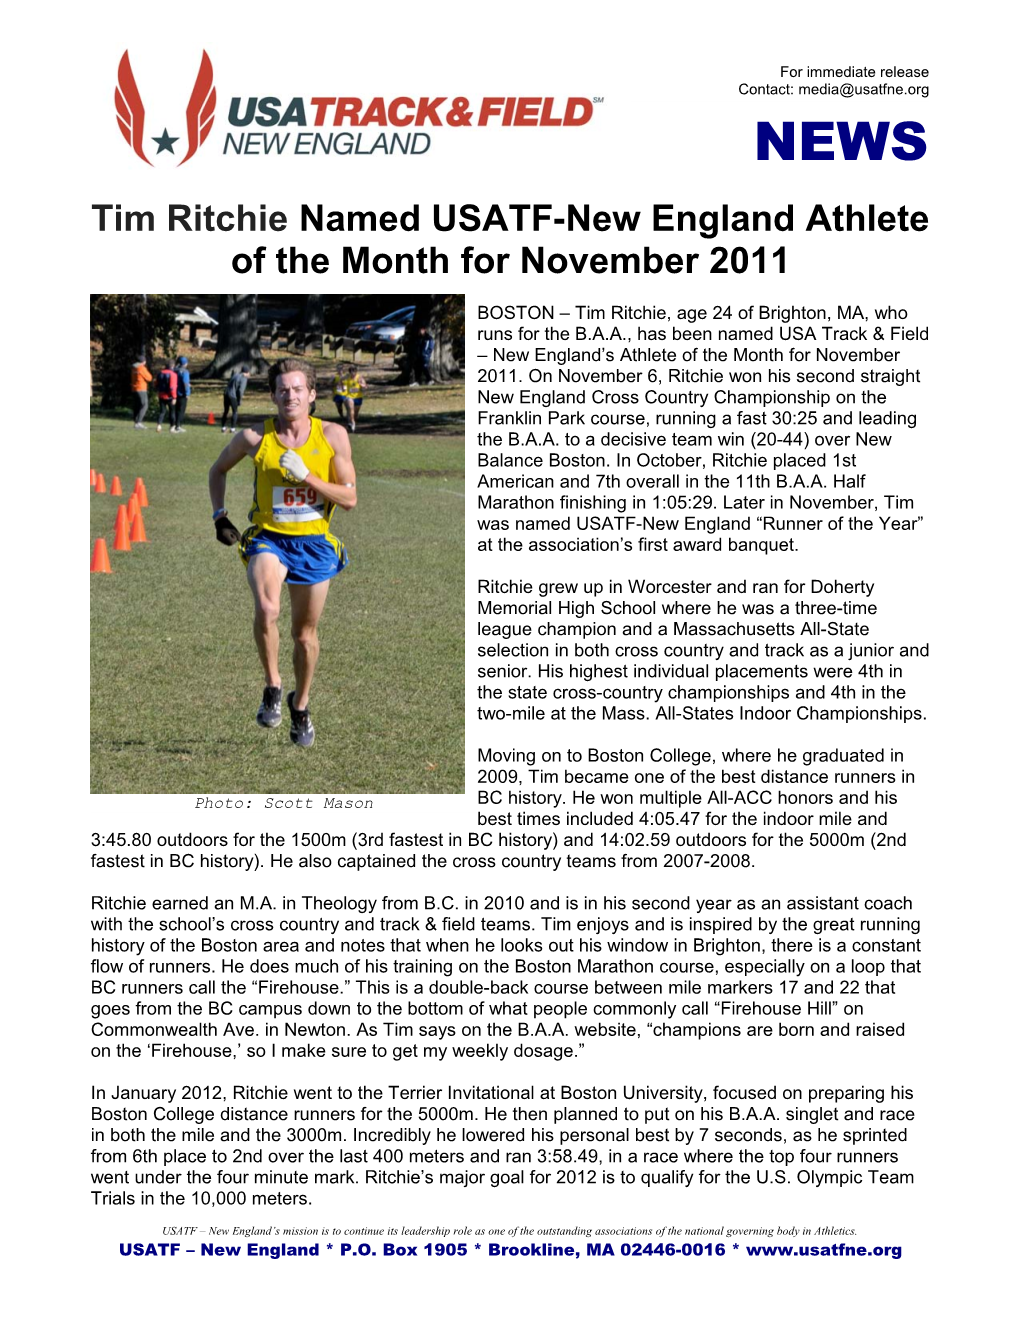 Tim Ritchie Named USATF-New England Athlete of the Month for November 2011